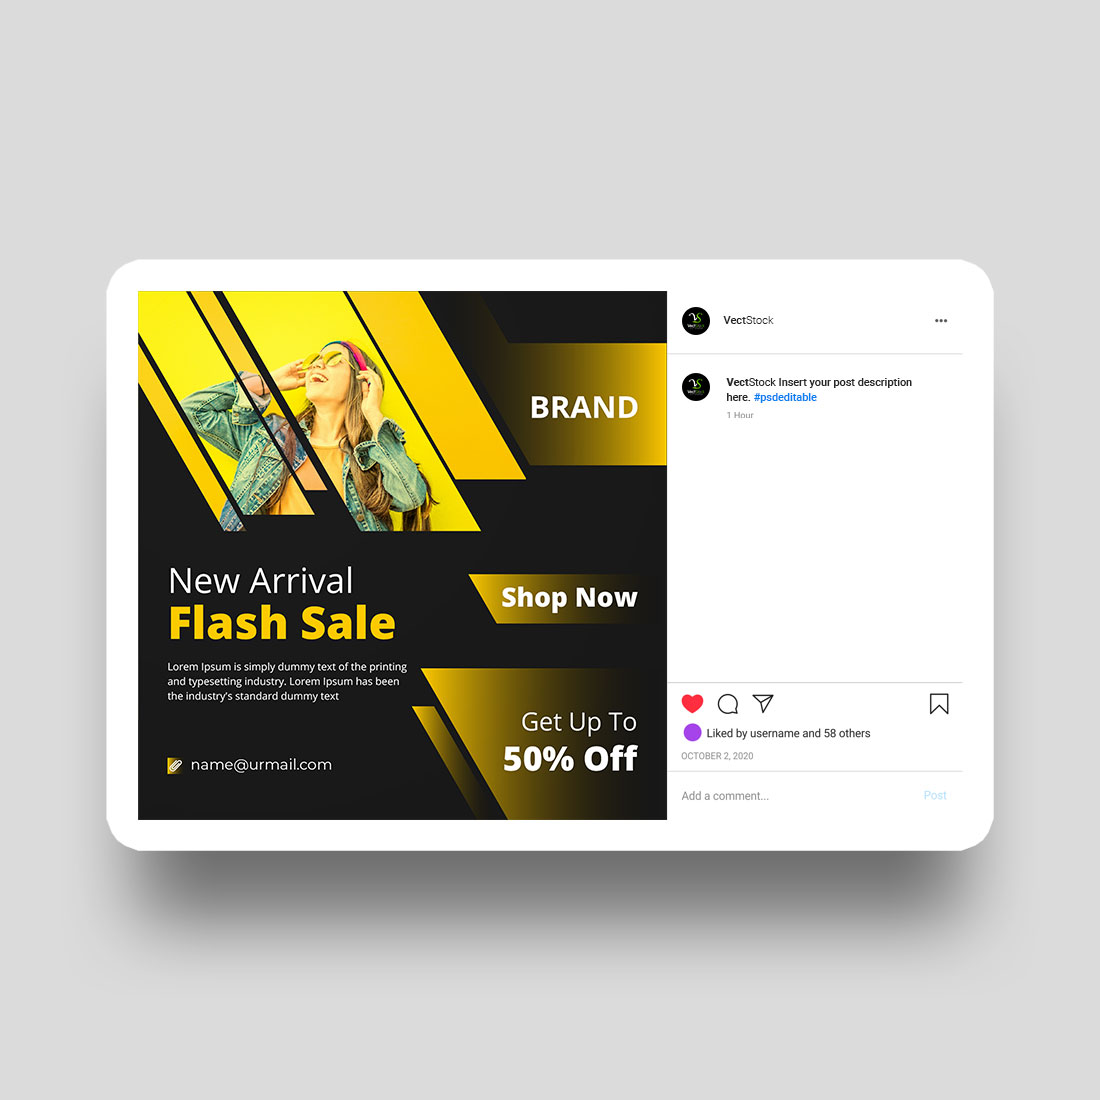 New arrival flash sale social media Instagram post and banner template design preview image.